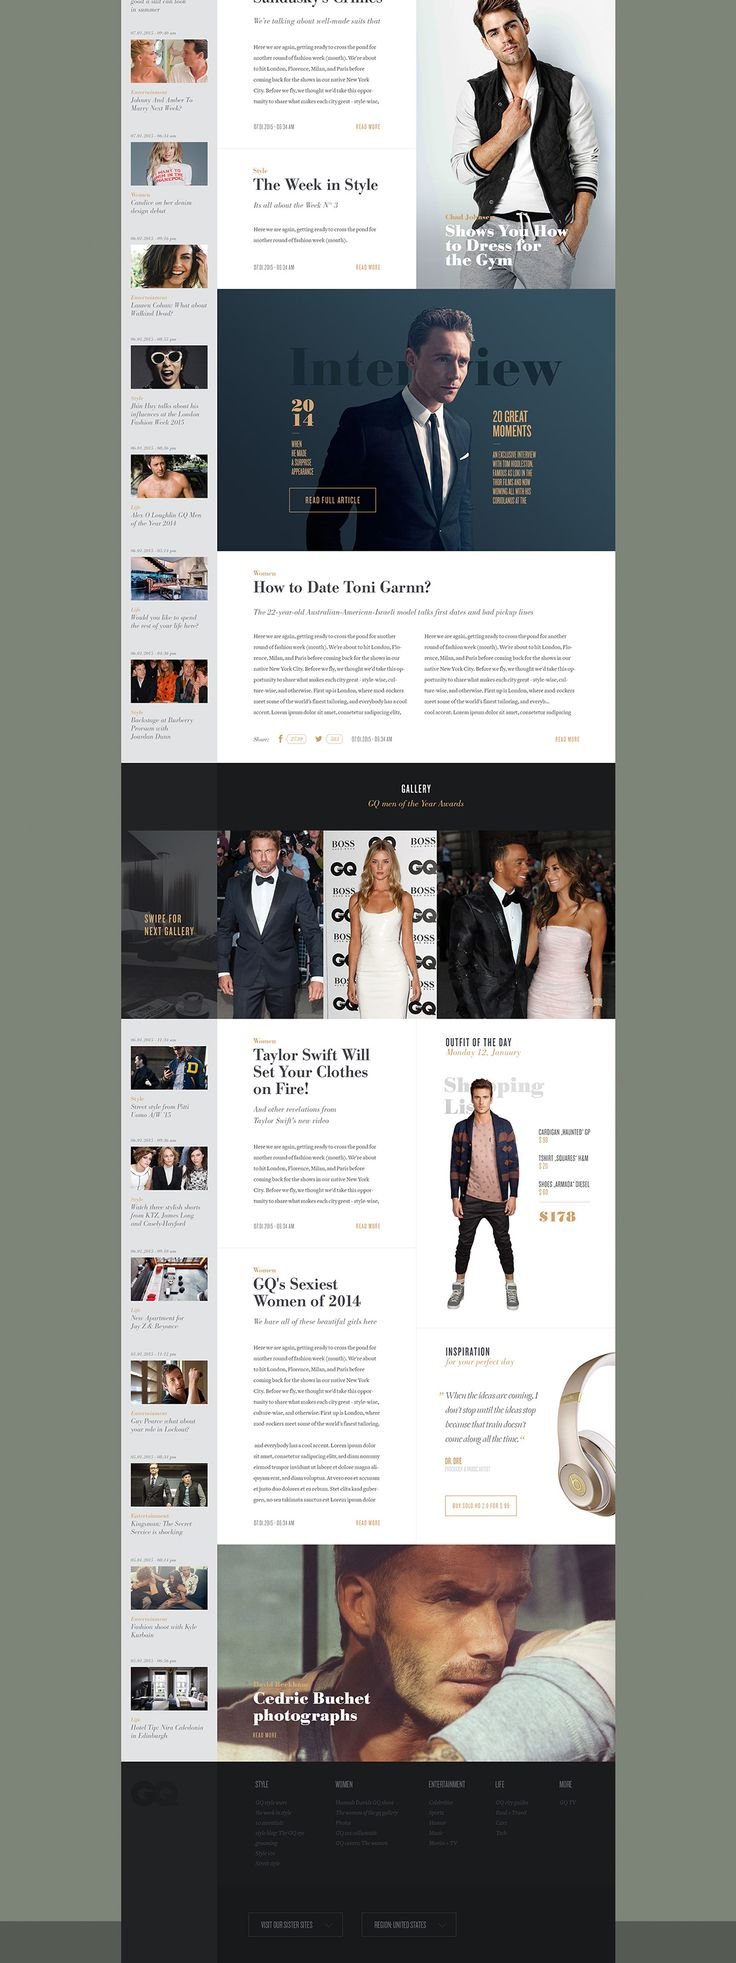 GQ Redesign Concept on Web Design Served